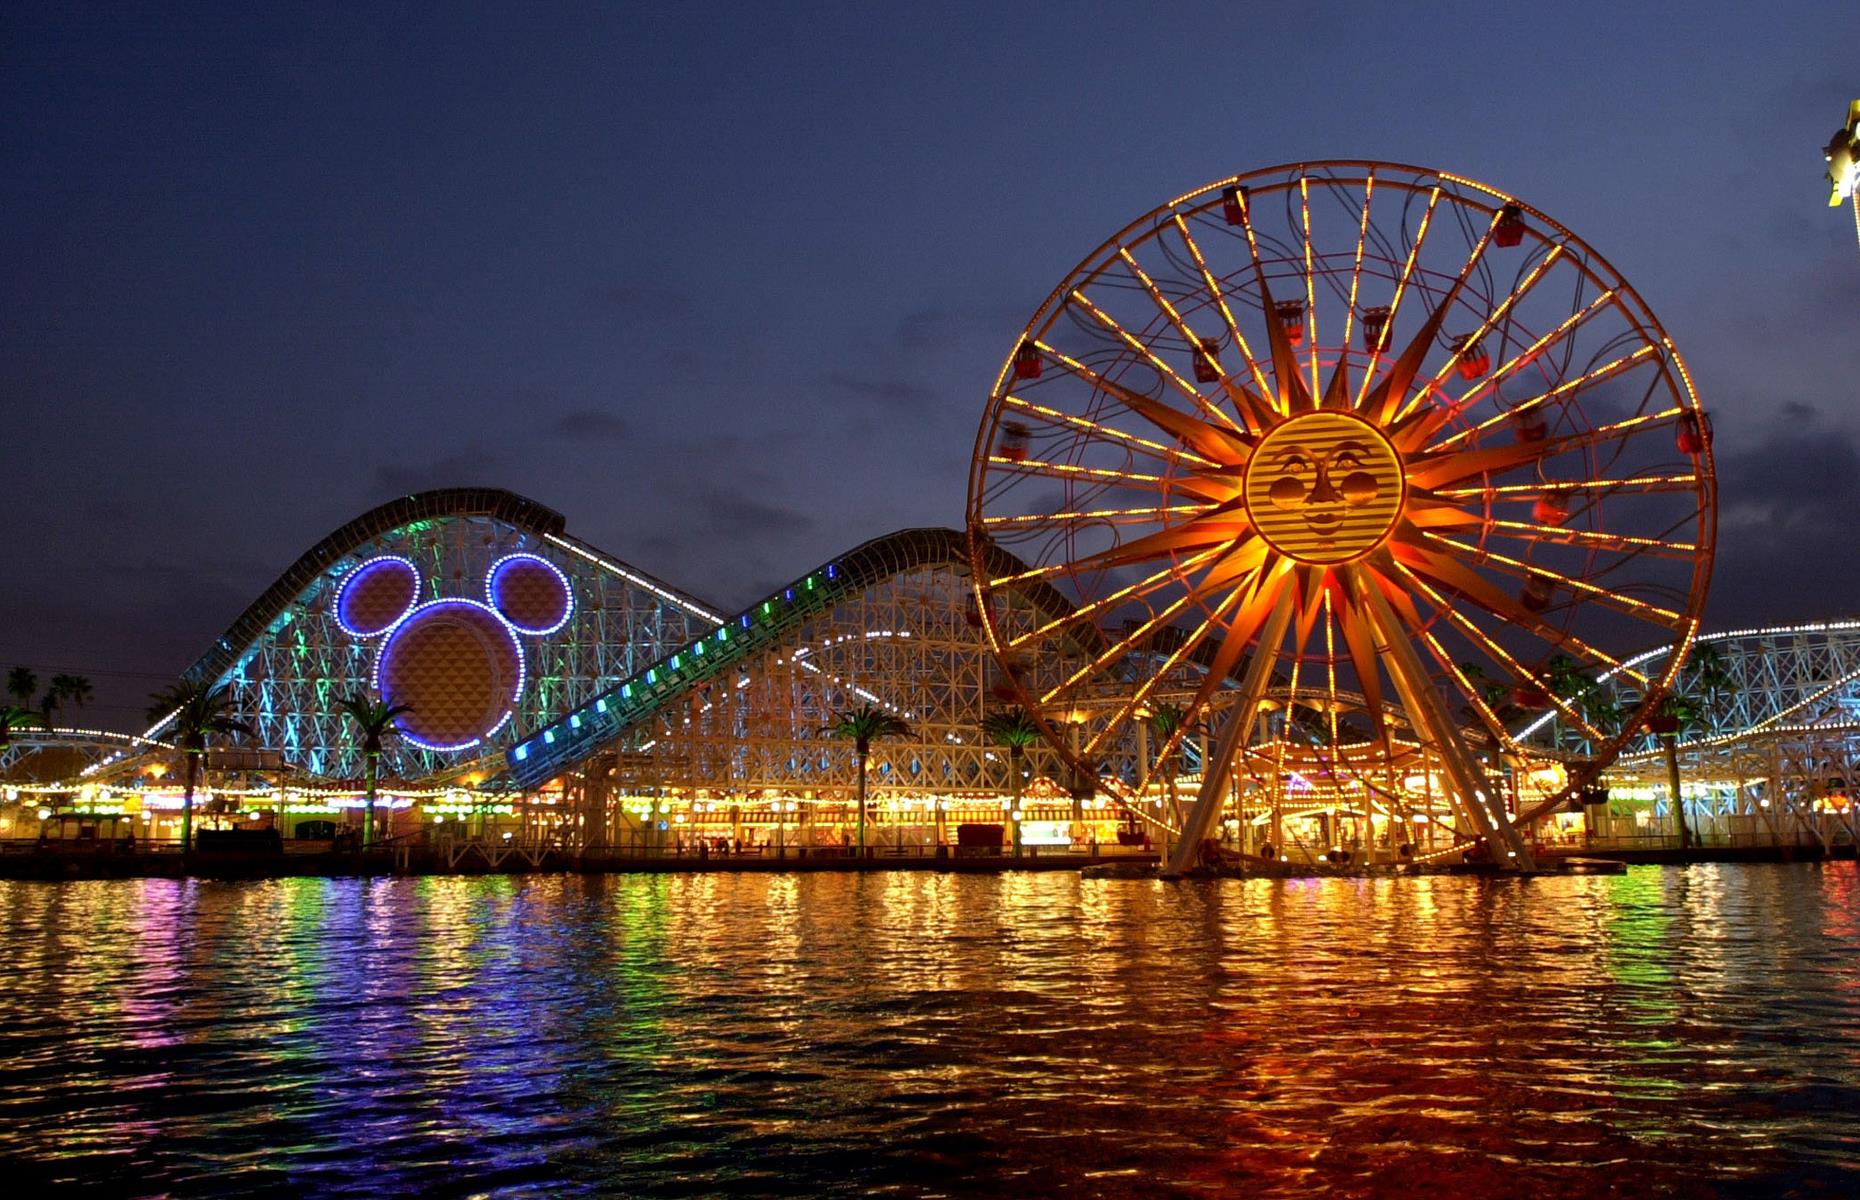 <p>There were grand openings across the pond too. Disneyland's California Adventure Park opened to a fanfare in 2001. The park is themed around the Golden State, and the 150-foot (46m) Ferris wheel (now Pixar Pal-A-Round, then the Sun Wheel) is one of the site's most striking attractions. Today it's emblazoned with Mickey Mouse's face. It's pictured here in February 2001, a few days before the park opened to the public.</p>  <p><strong><a href="https://www.loveexploring.com/news/88130/what-to-see-where-to-stay-shopping-in-anaheim-california">Check out more exciting attractions in Anaheim, California</a></strong></p>